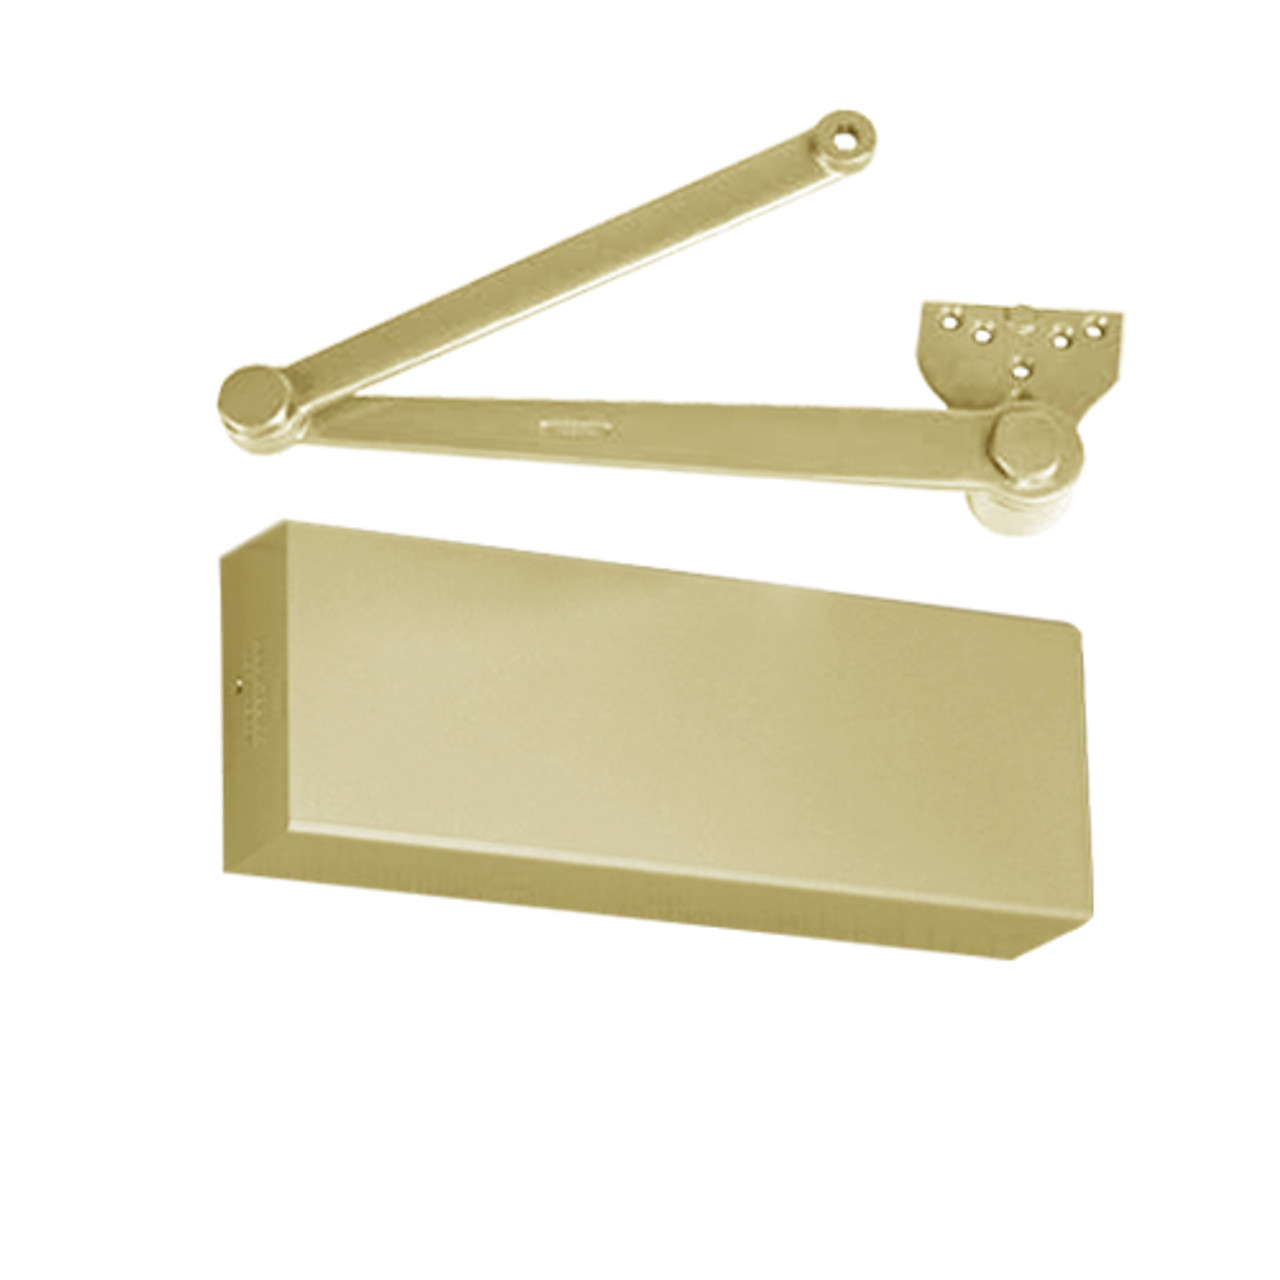 PRO9500M-696 Norton 9500 Series Non-Hold Open Cast Iron Door Closer with Parallel Rigid Offset Arm in Gold Finish